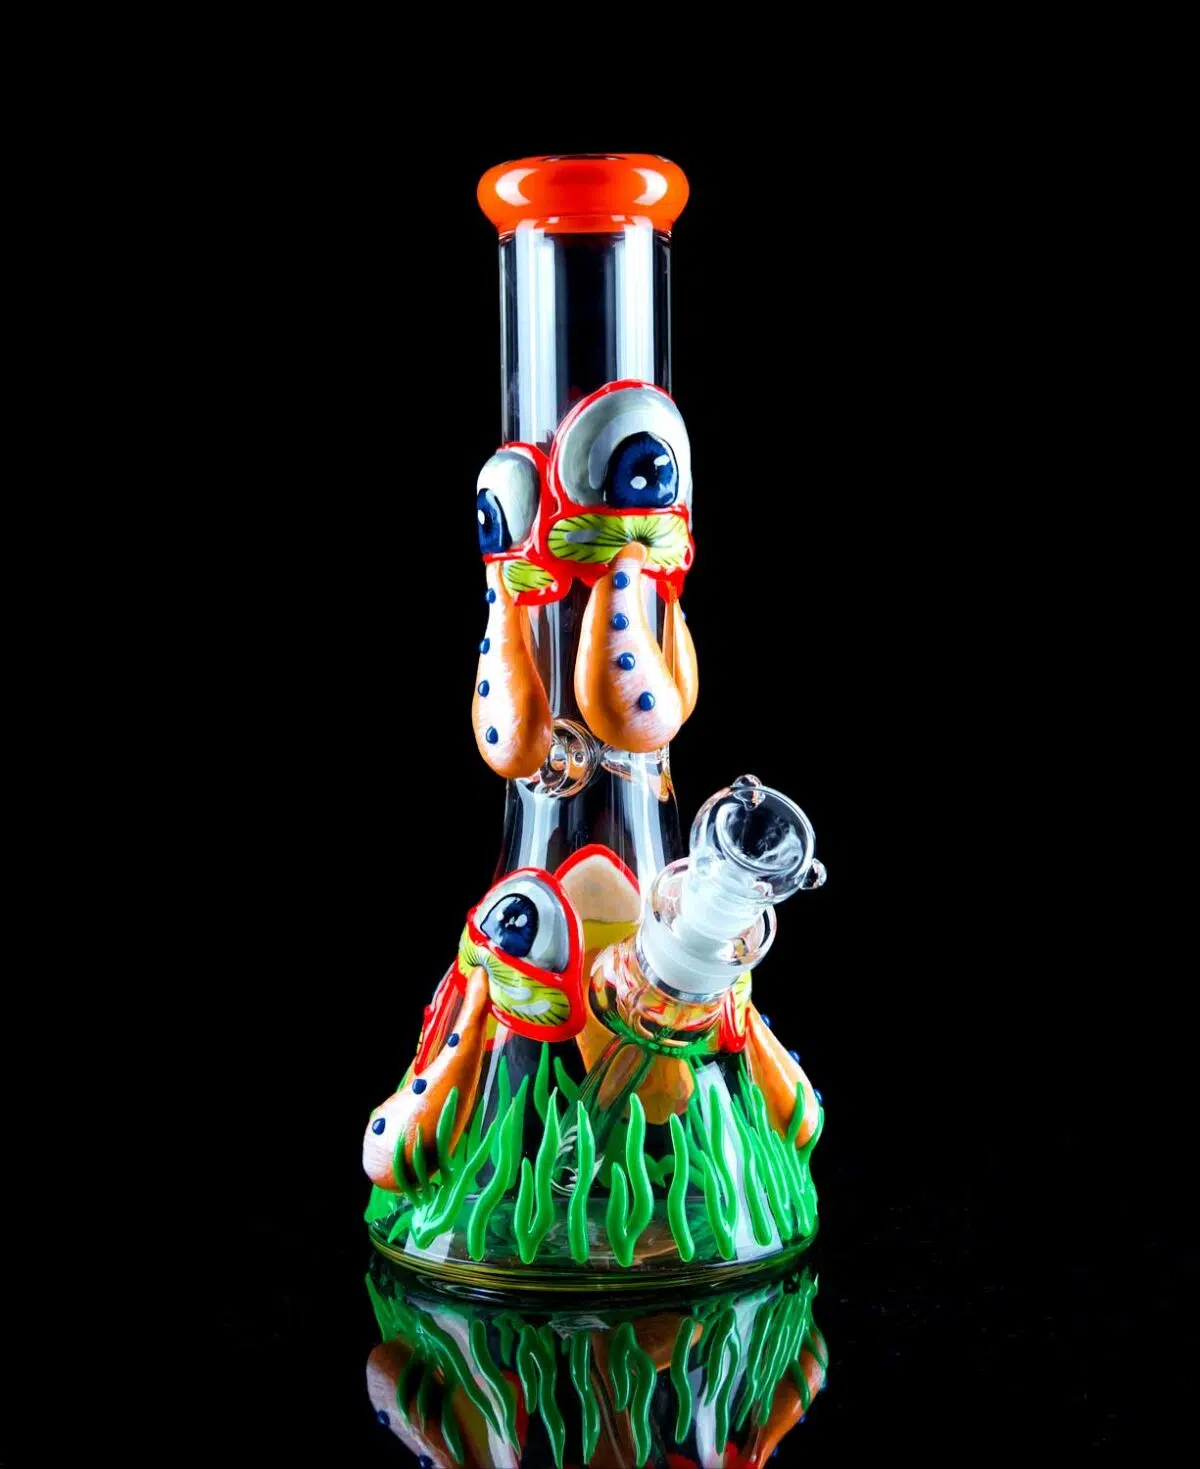 glow in the dark mushroom bong with trippy eyes shaped like mushroom caps and an ice catcher